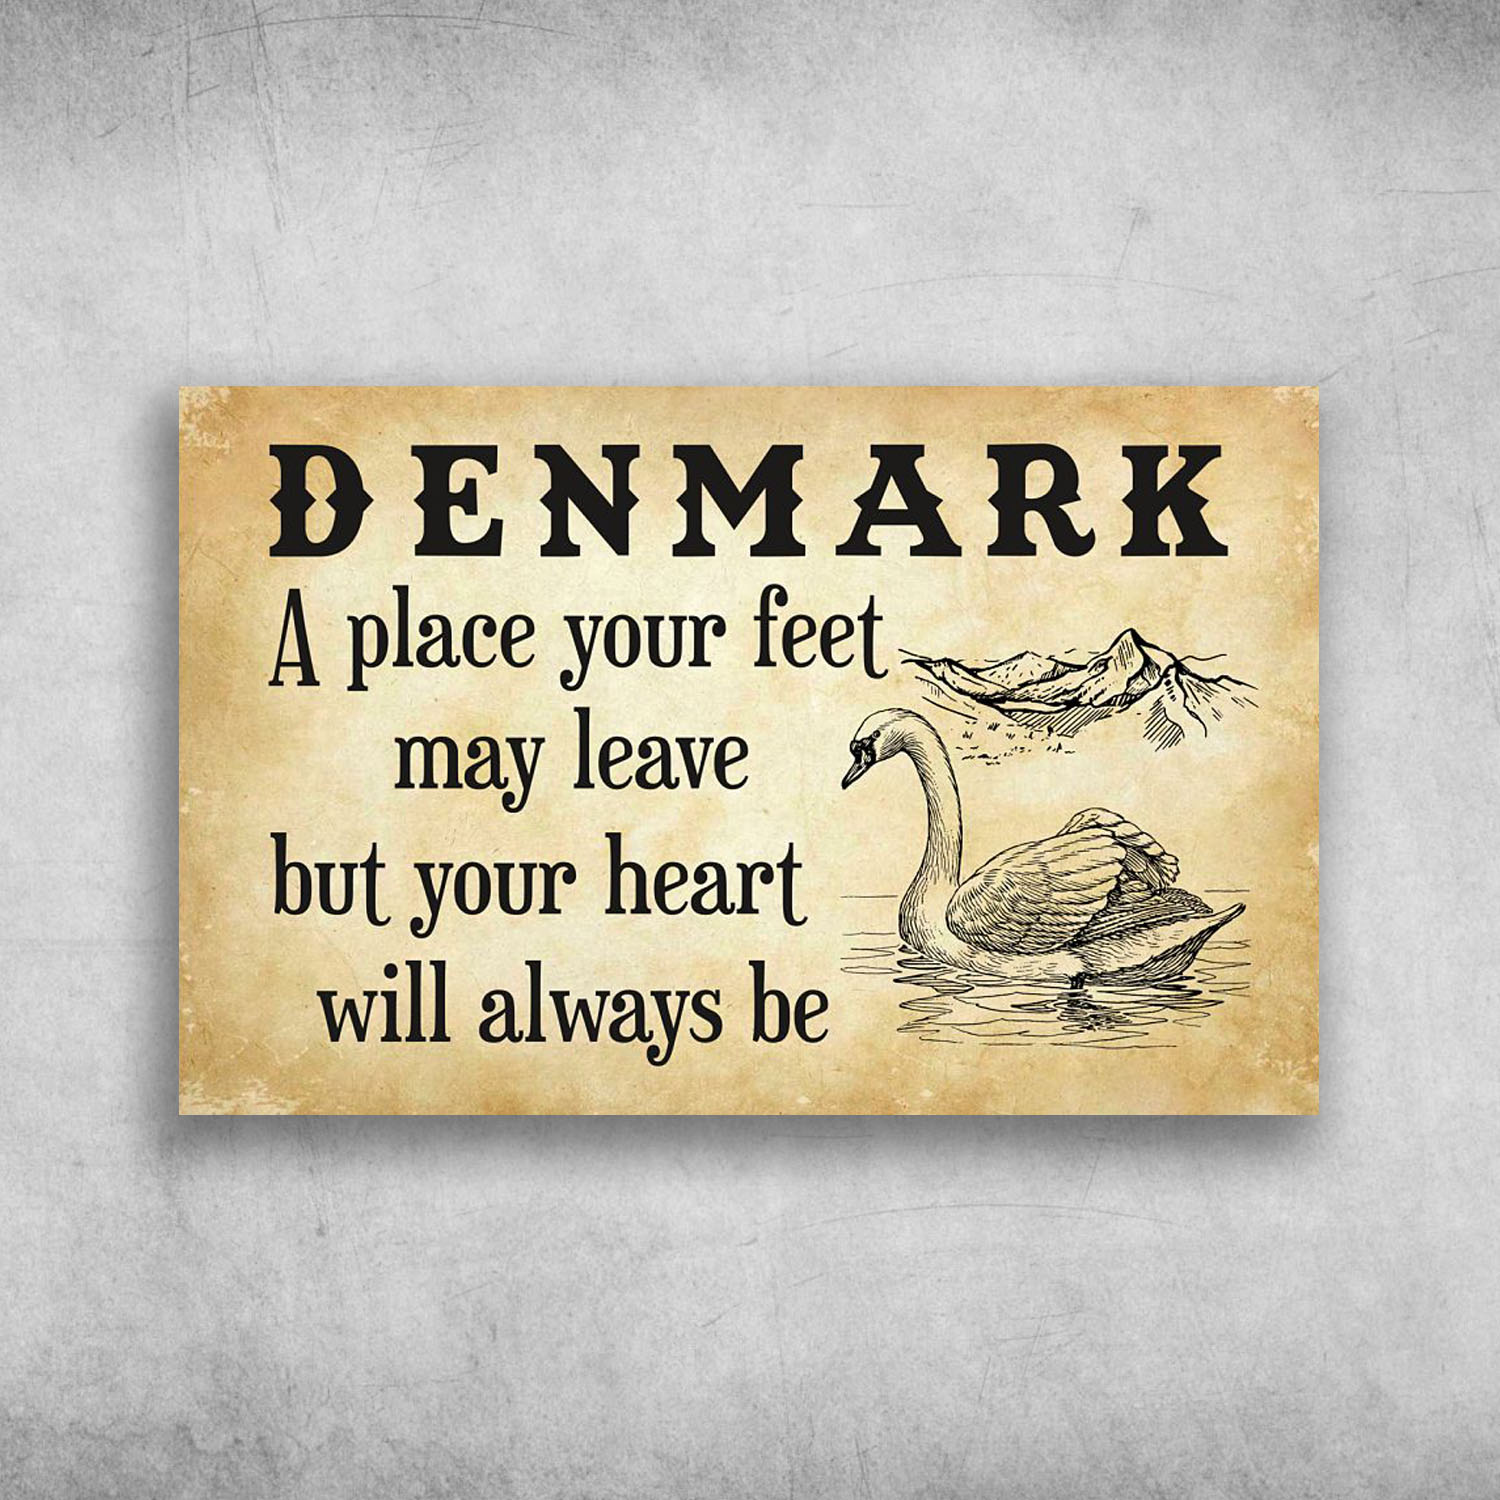 Denmark A Place Your Feet May Leave